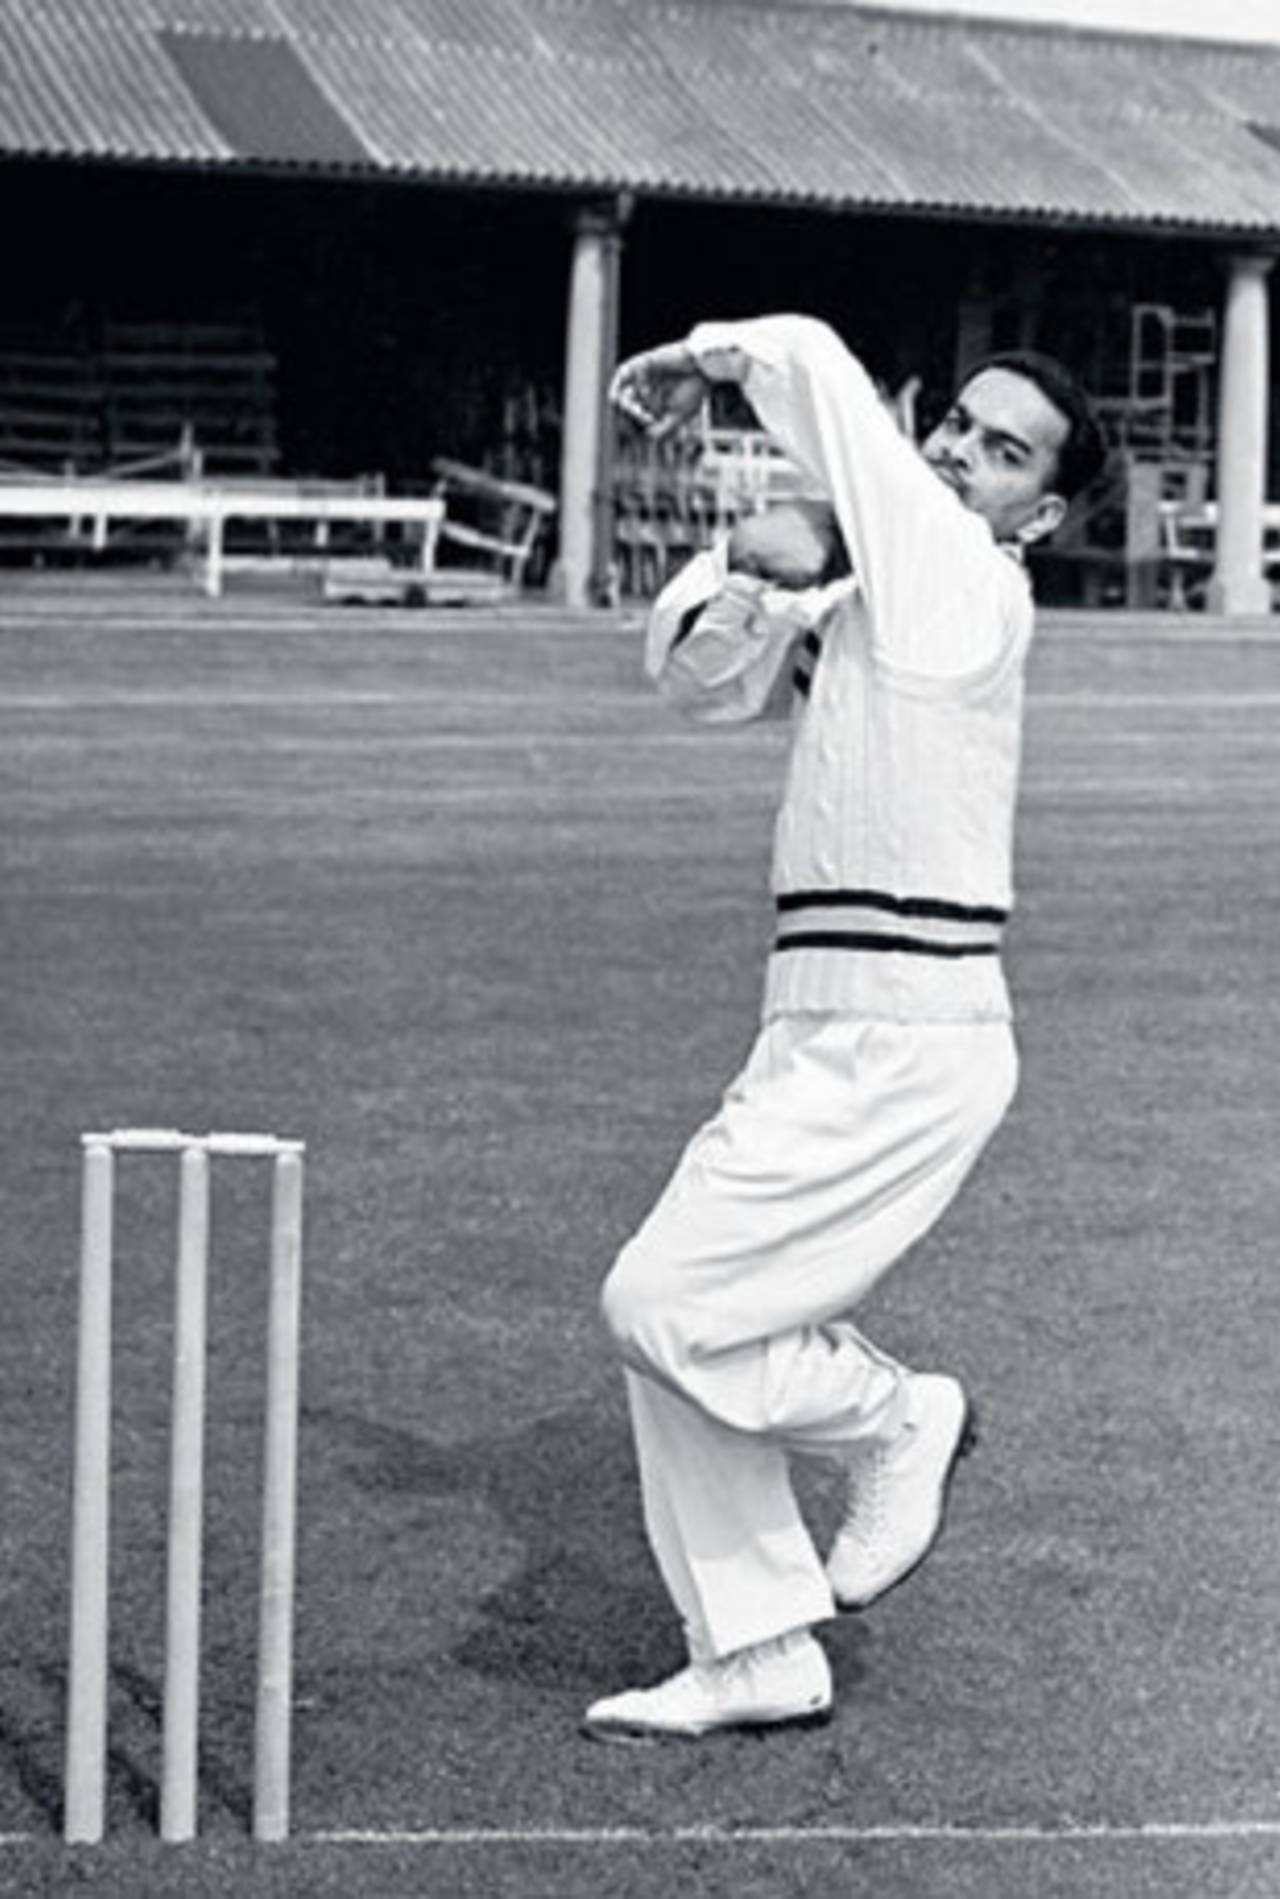 Subhash Gupte in the nets at Lord's in 1961